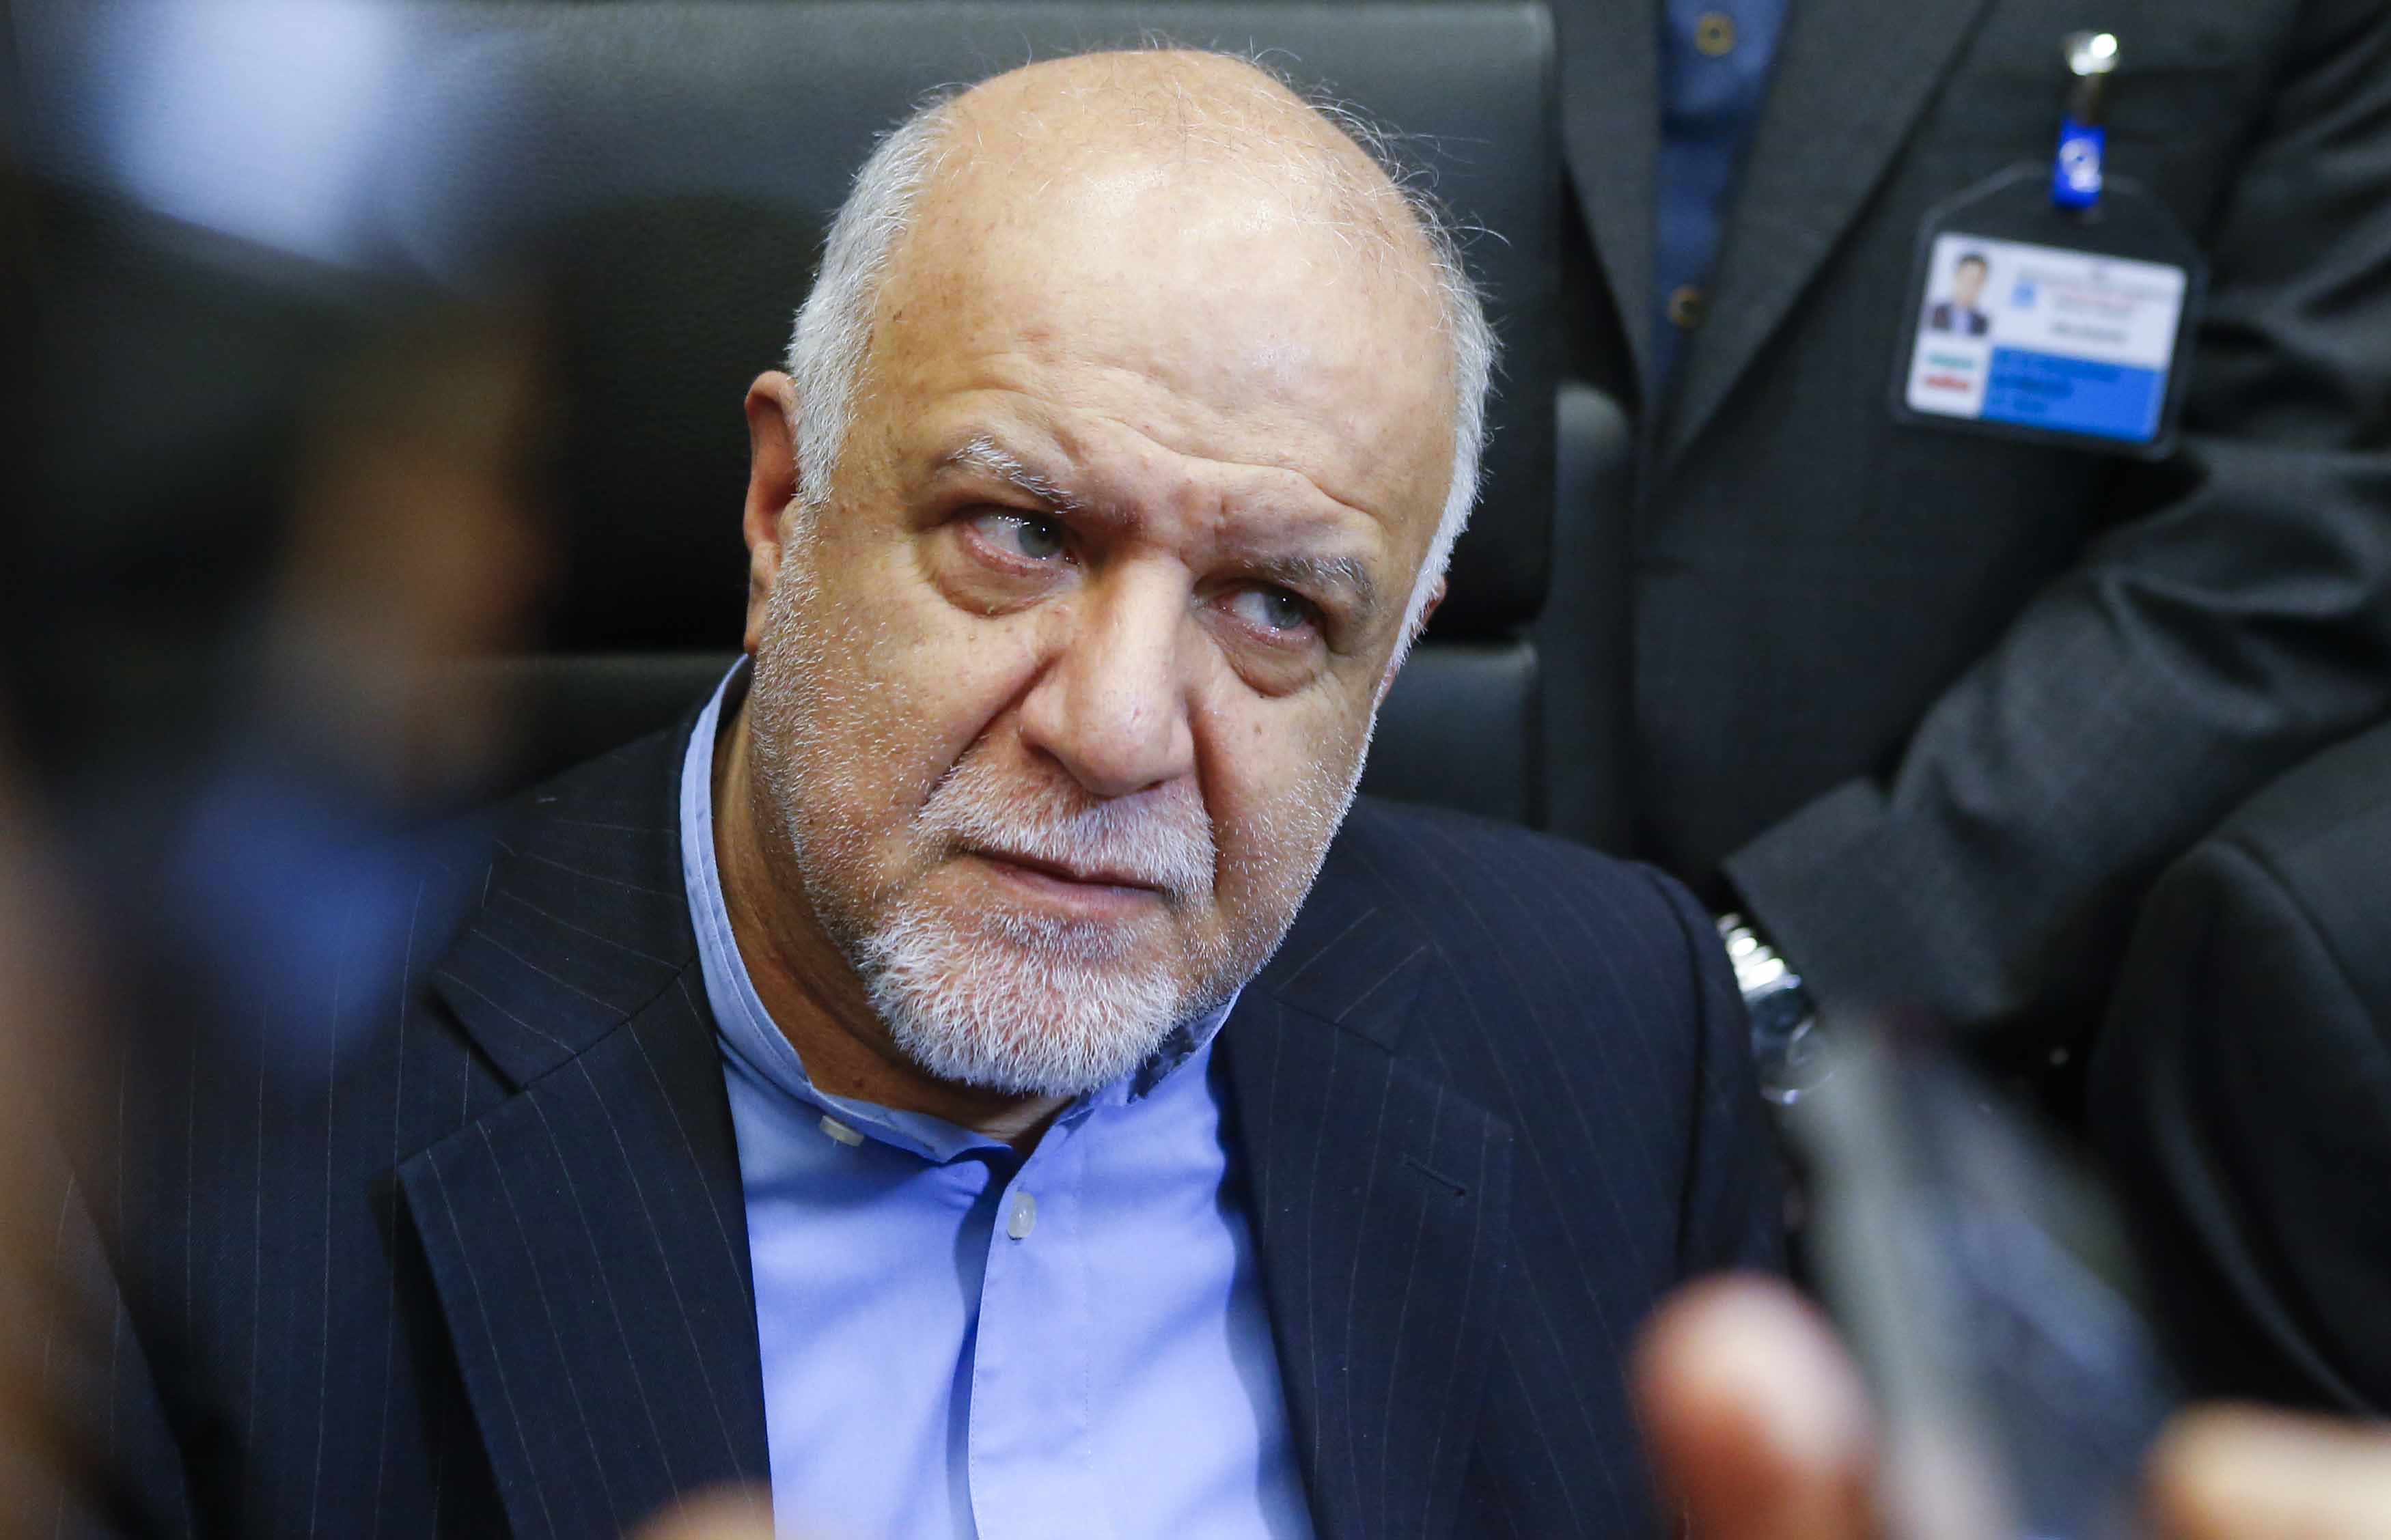 Oil min: Iran supports every decision to bring stability to oil market